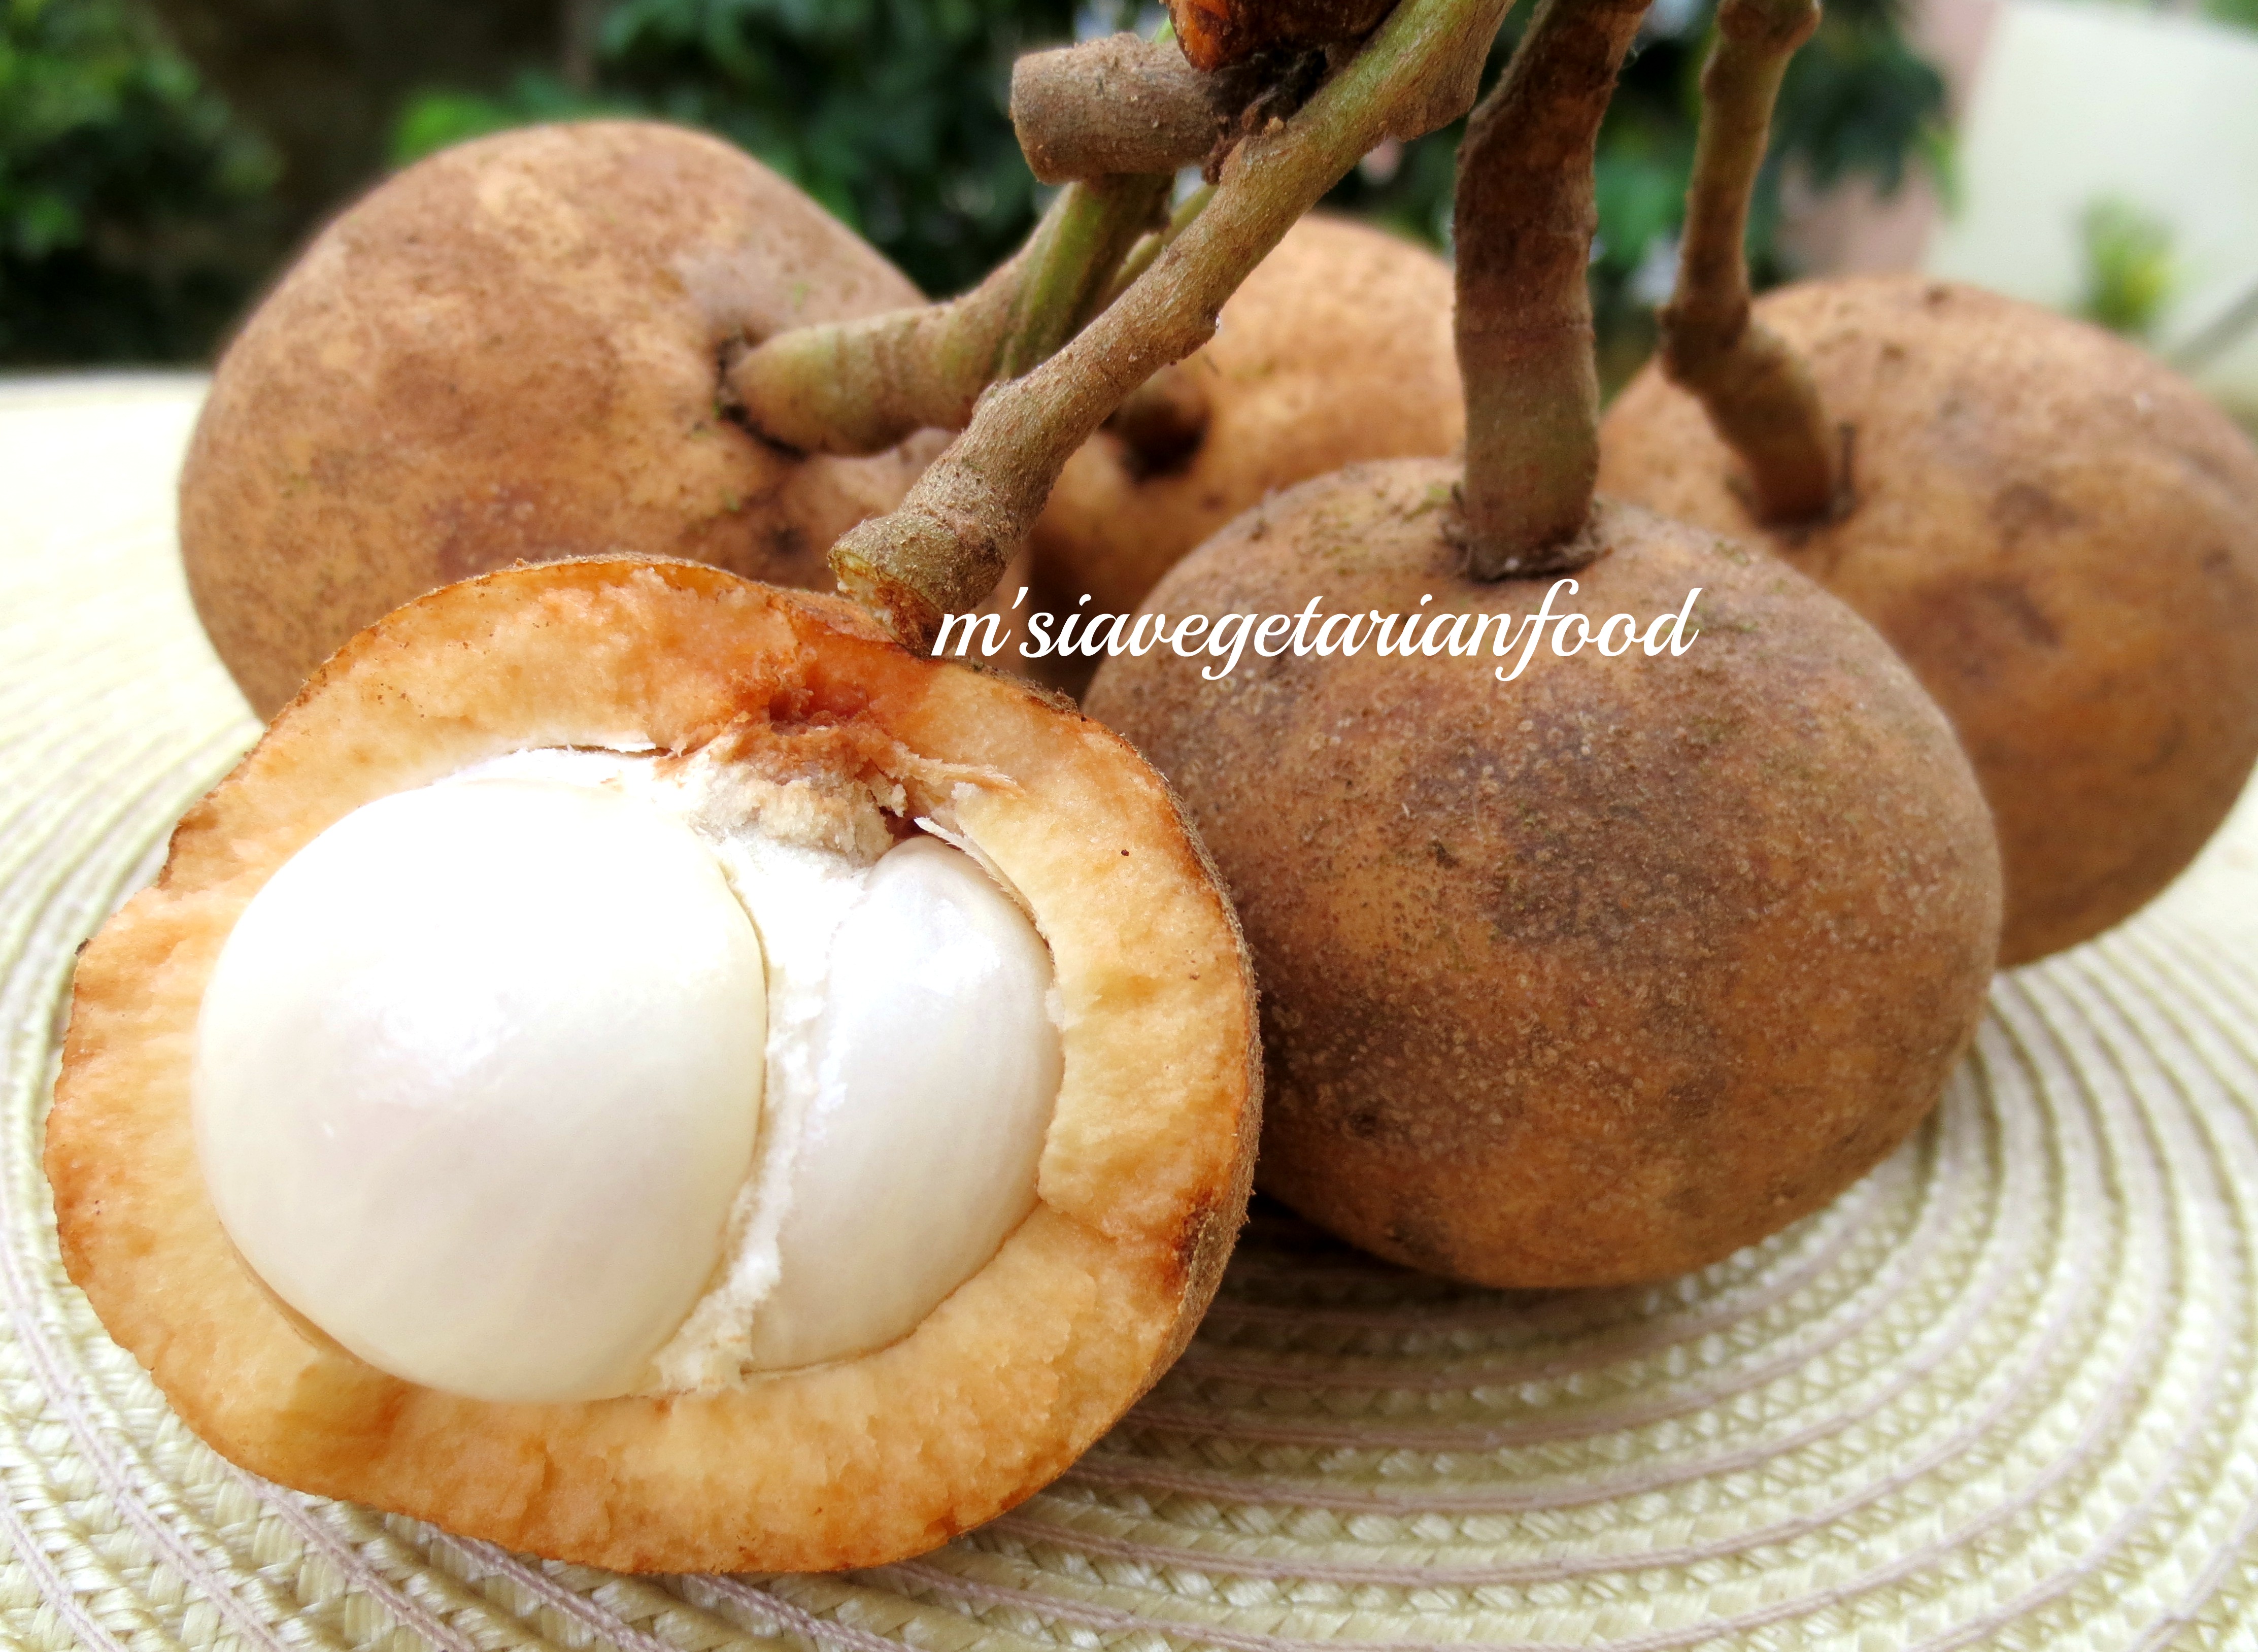 Tampoi in orange brownish skin with pearly white pulp